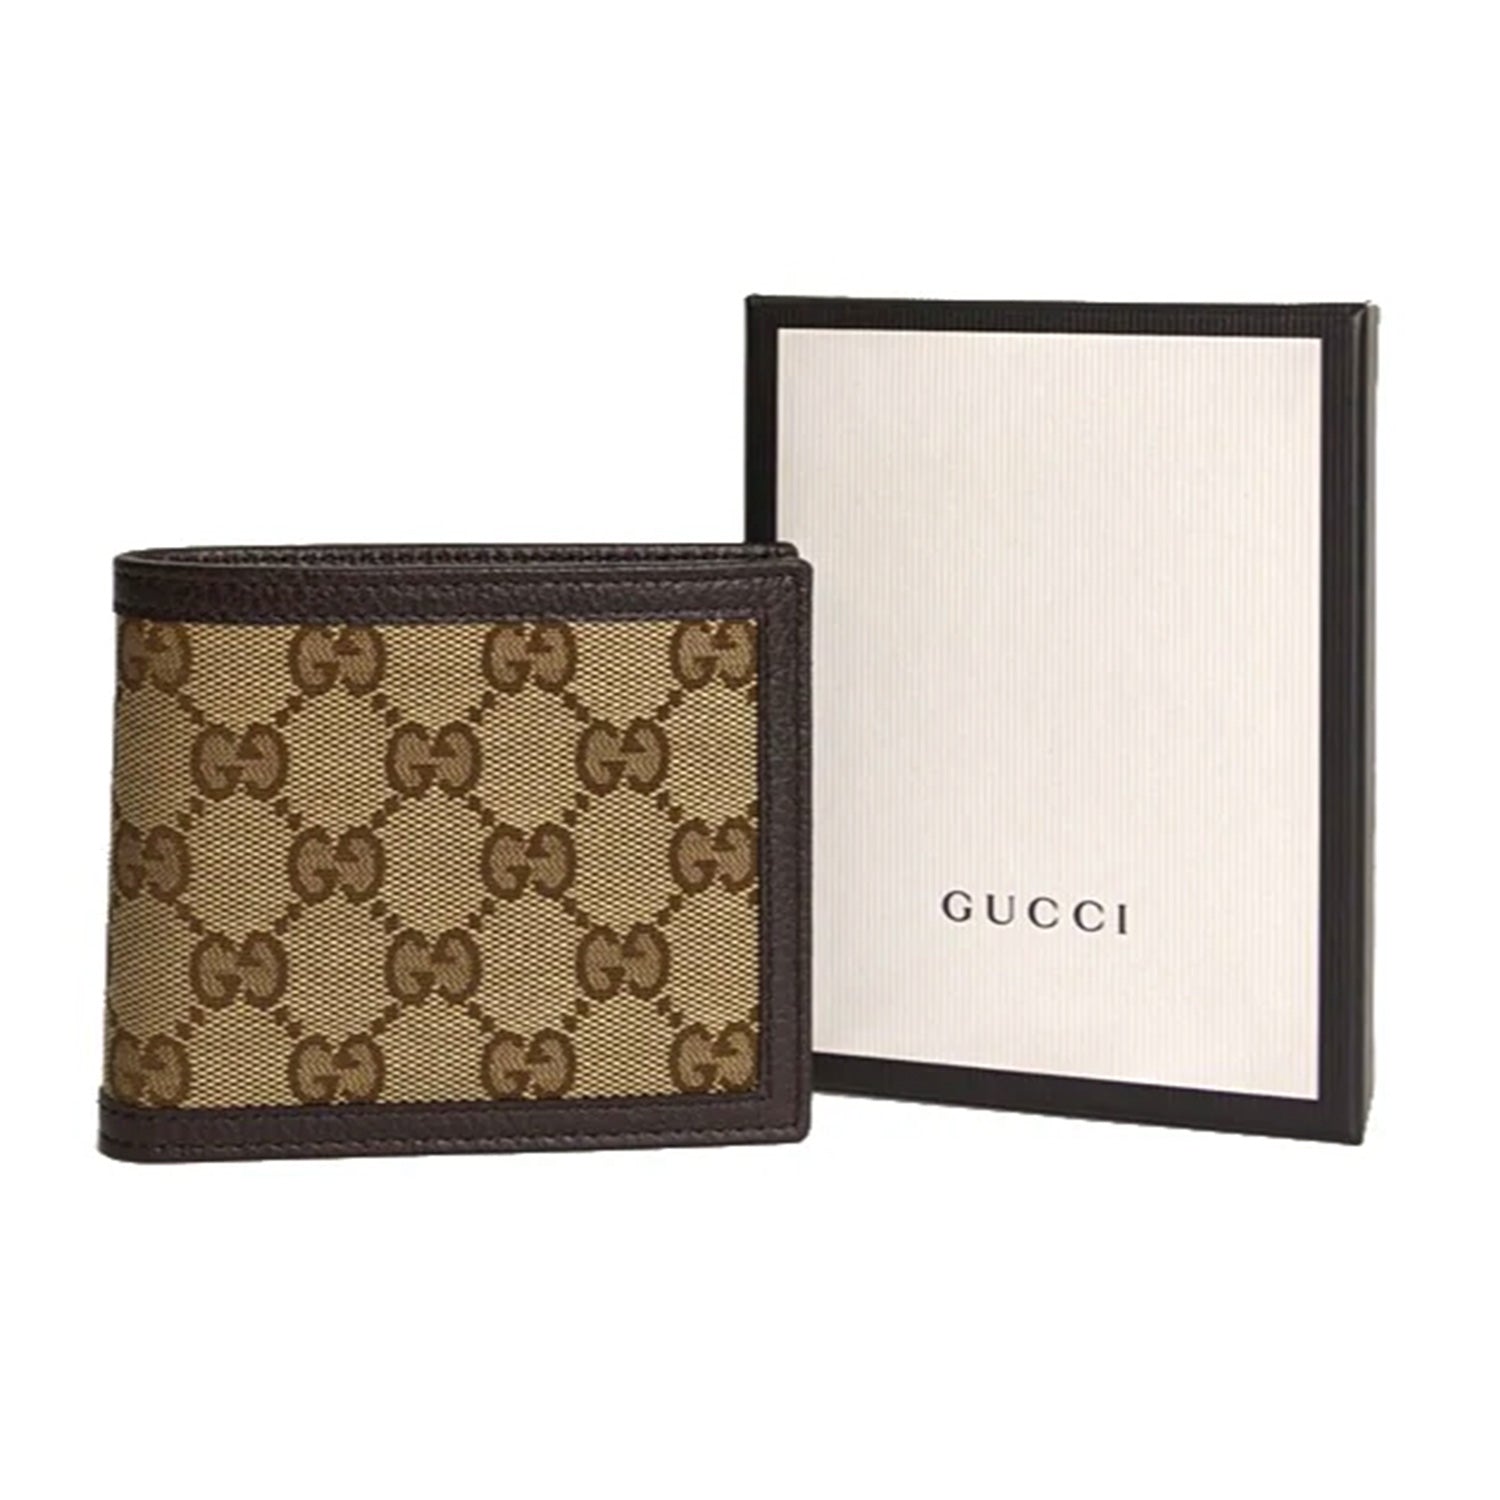 Logo leather pouch in black - Gucci | Mytheresa